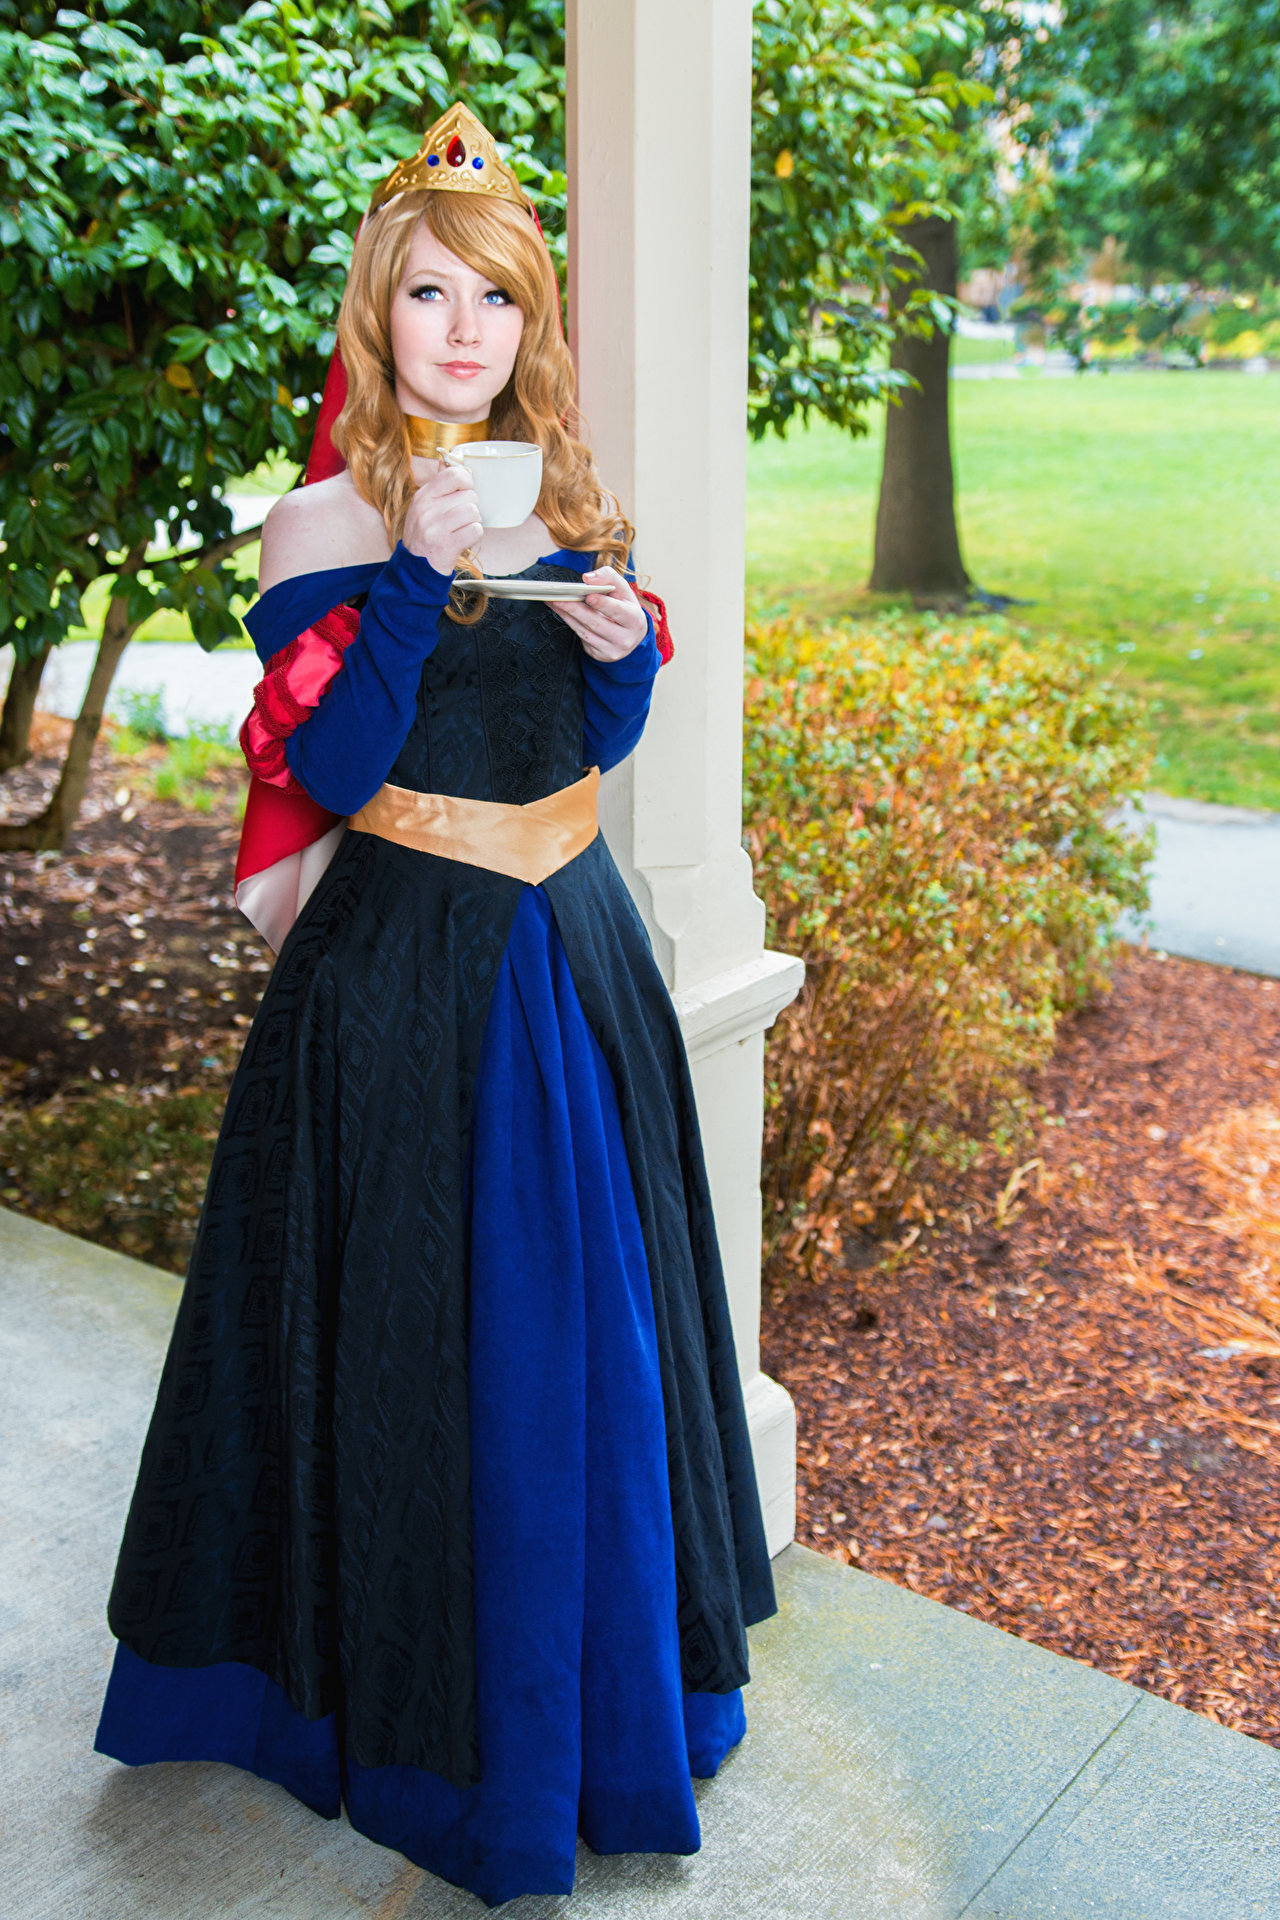 Cospix.net photo featuring CosplayPNW and Princess of Tea